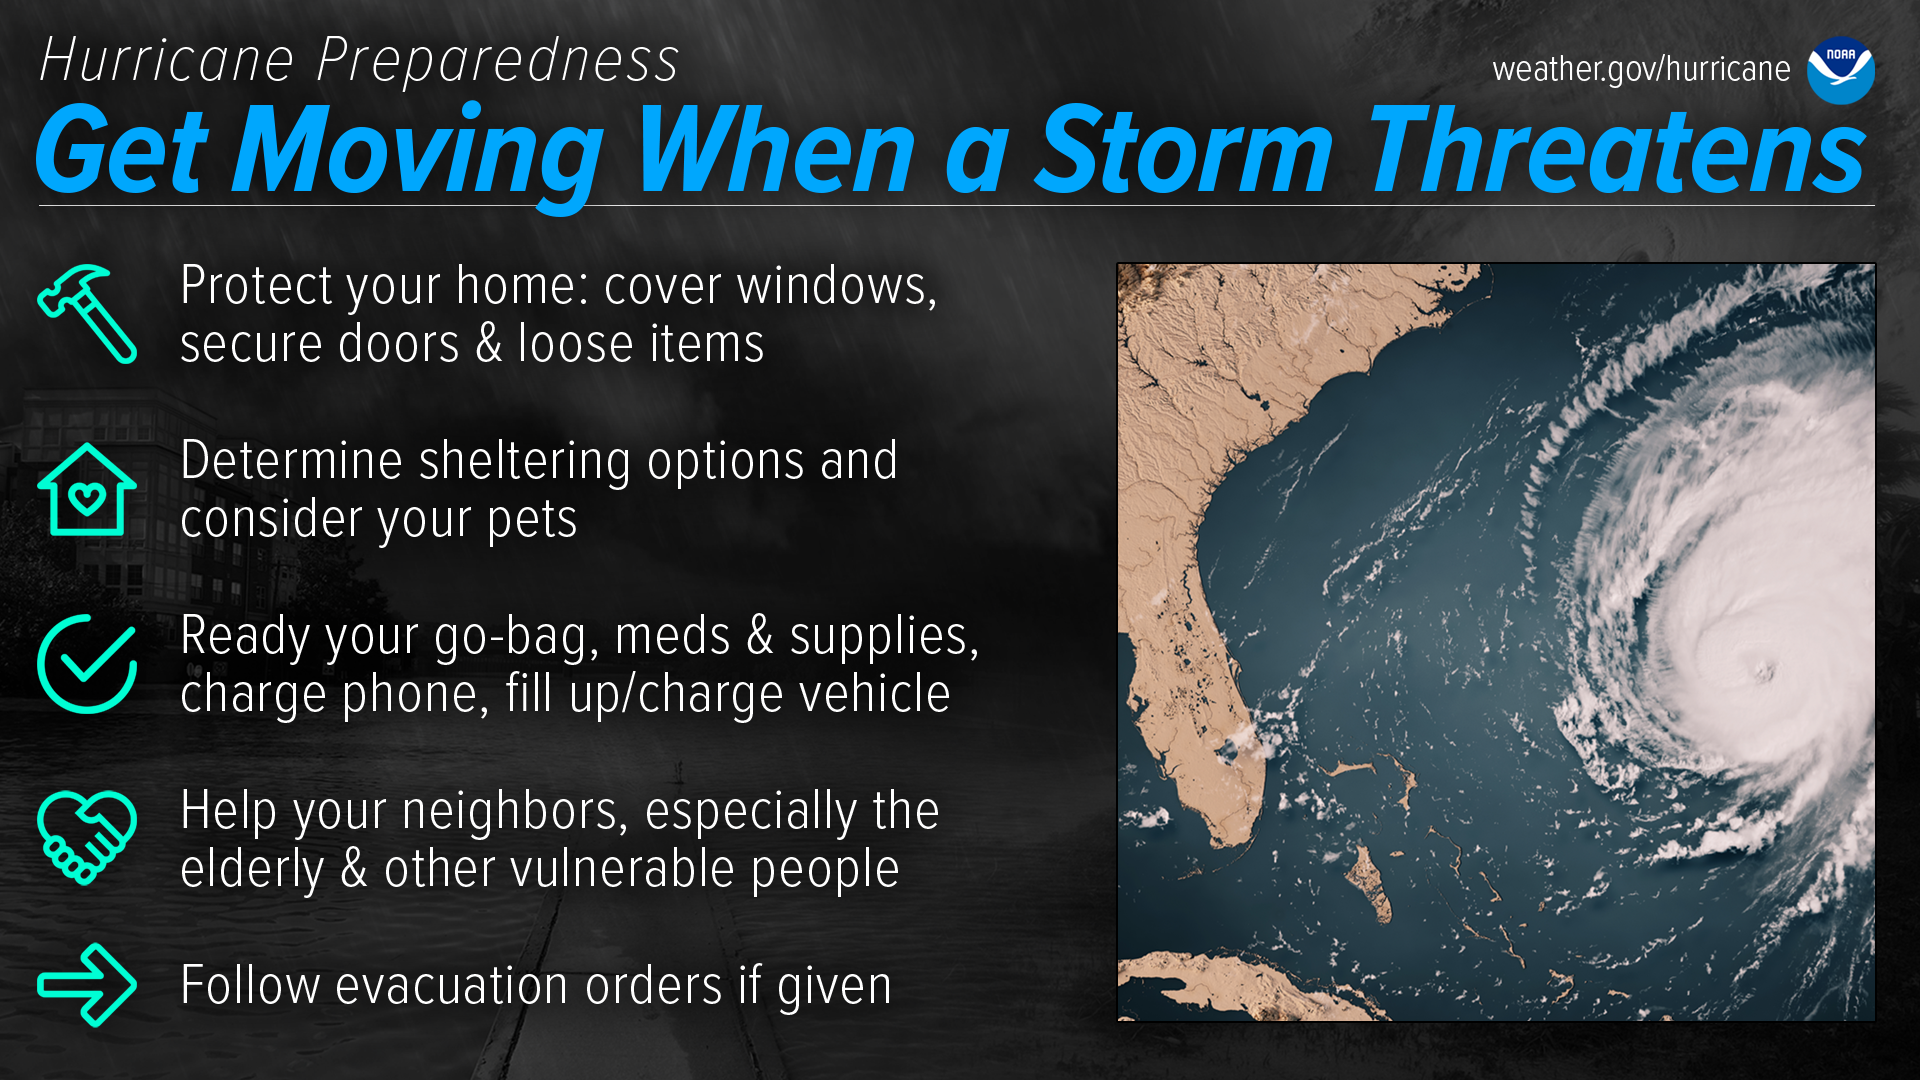 Hurricane Preparedness - Get Moving When a Storm Threatens. Protect your home: cover windows, secure doors and loose items. Determine sheltering options and consider your pets. Ready your go-bag, meds and supplies, charge phone, fill up/charge vehicle. Help your neighbors, especially the elderly & other vulnerable people. Follow evacuation orders if given.